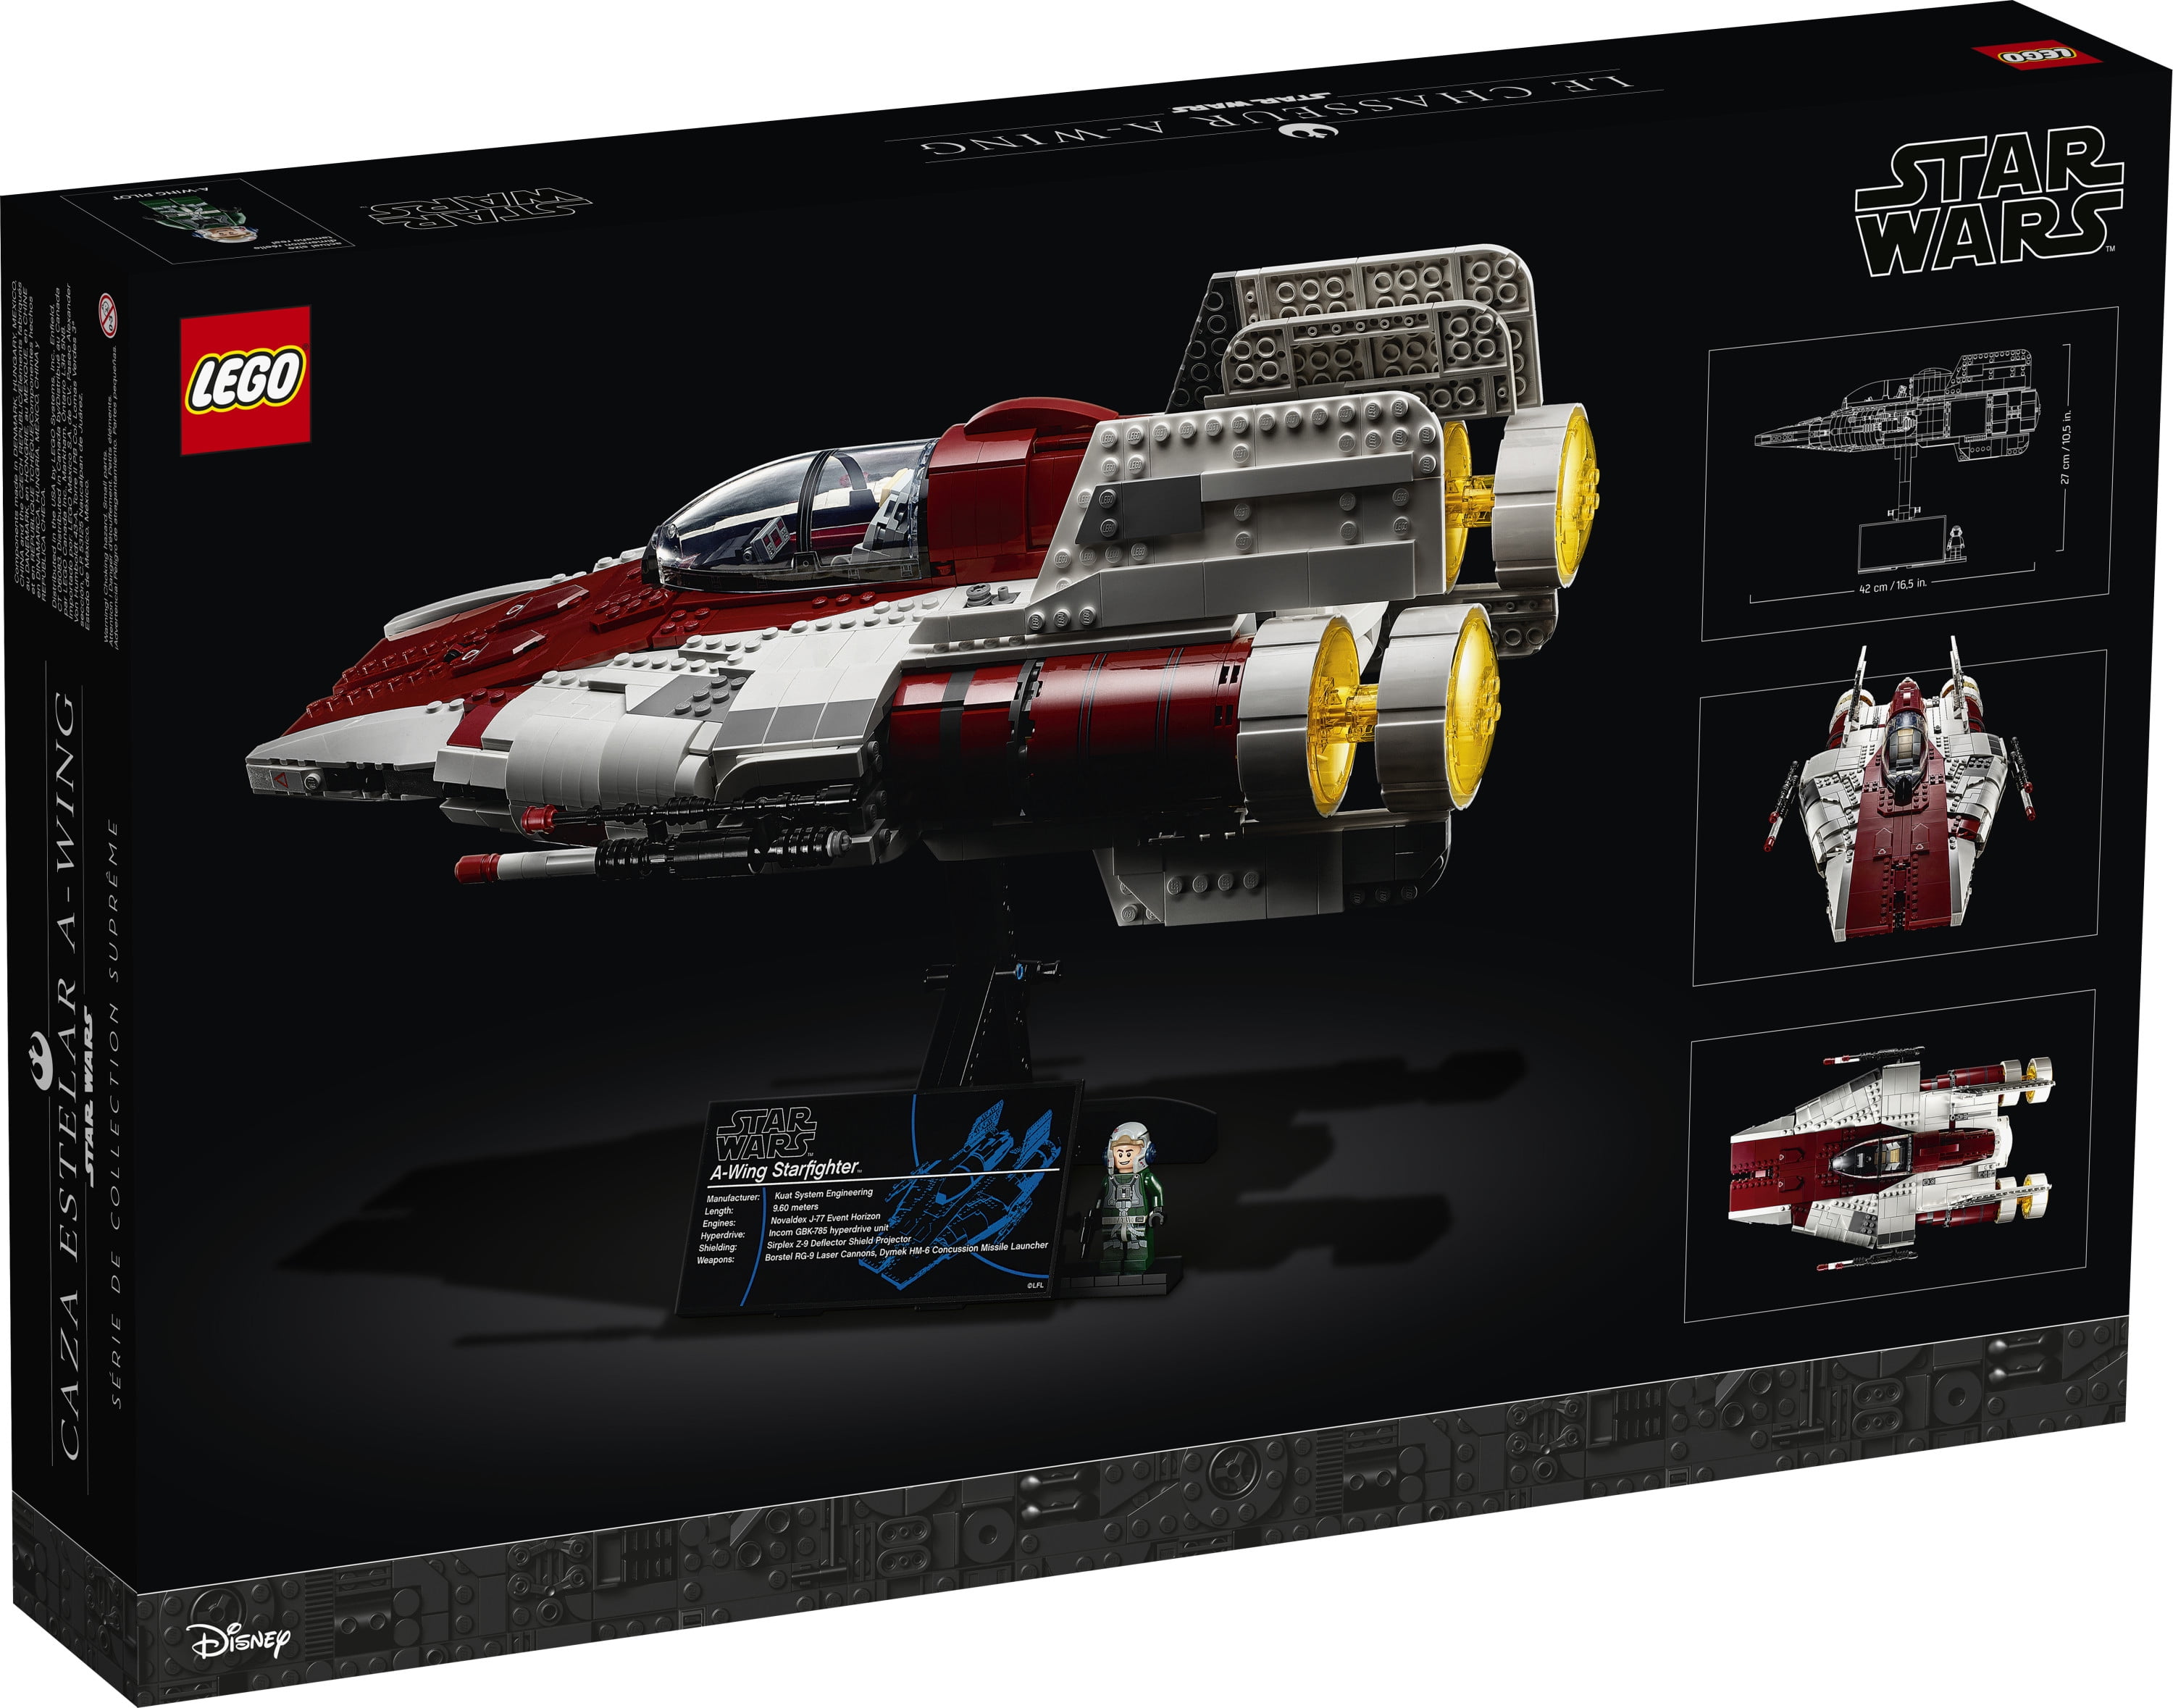 Star Wars A-wing Starfighter 75275 Ultimate Series Building Kit (1,673 Pieces) -